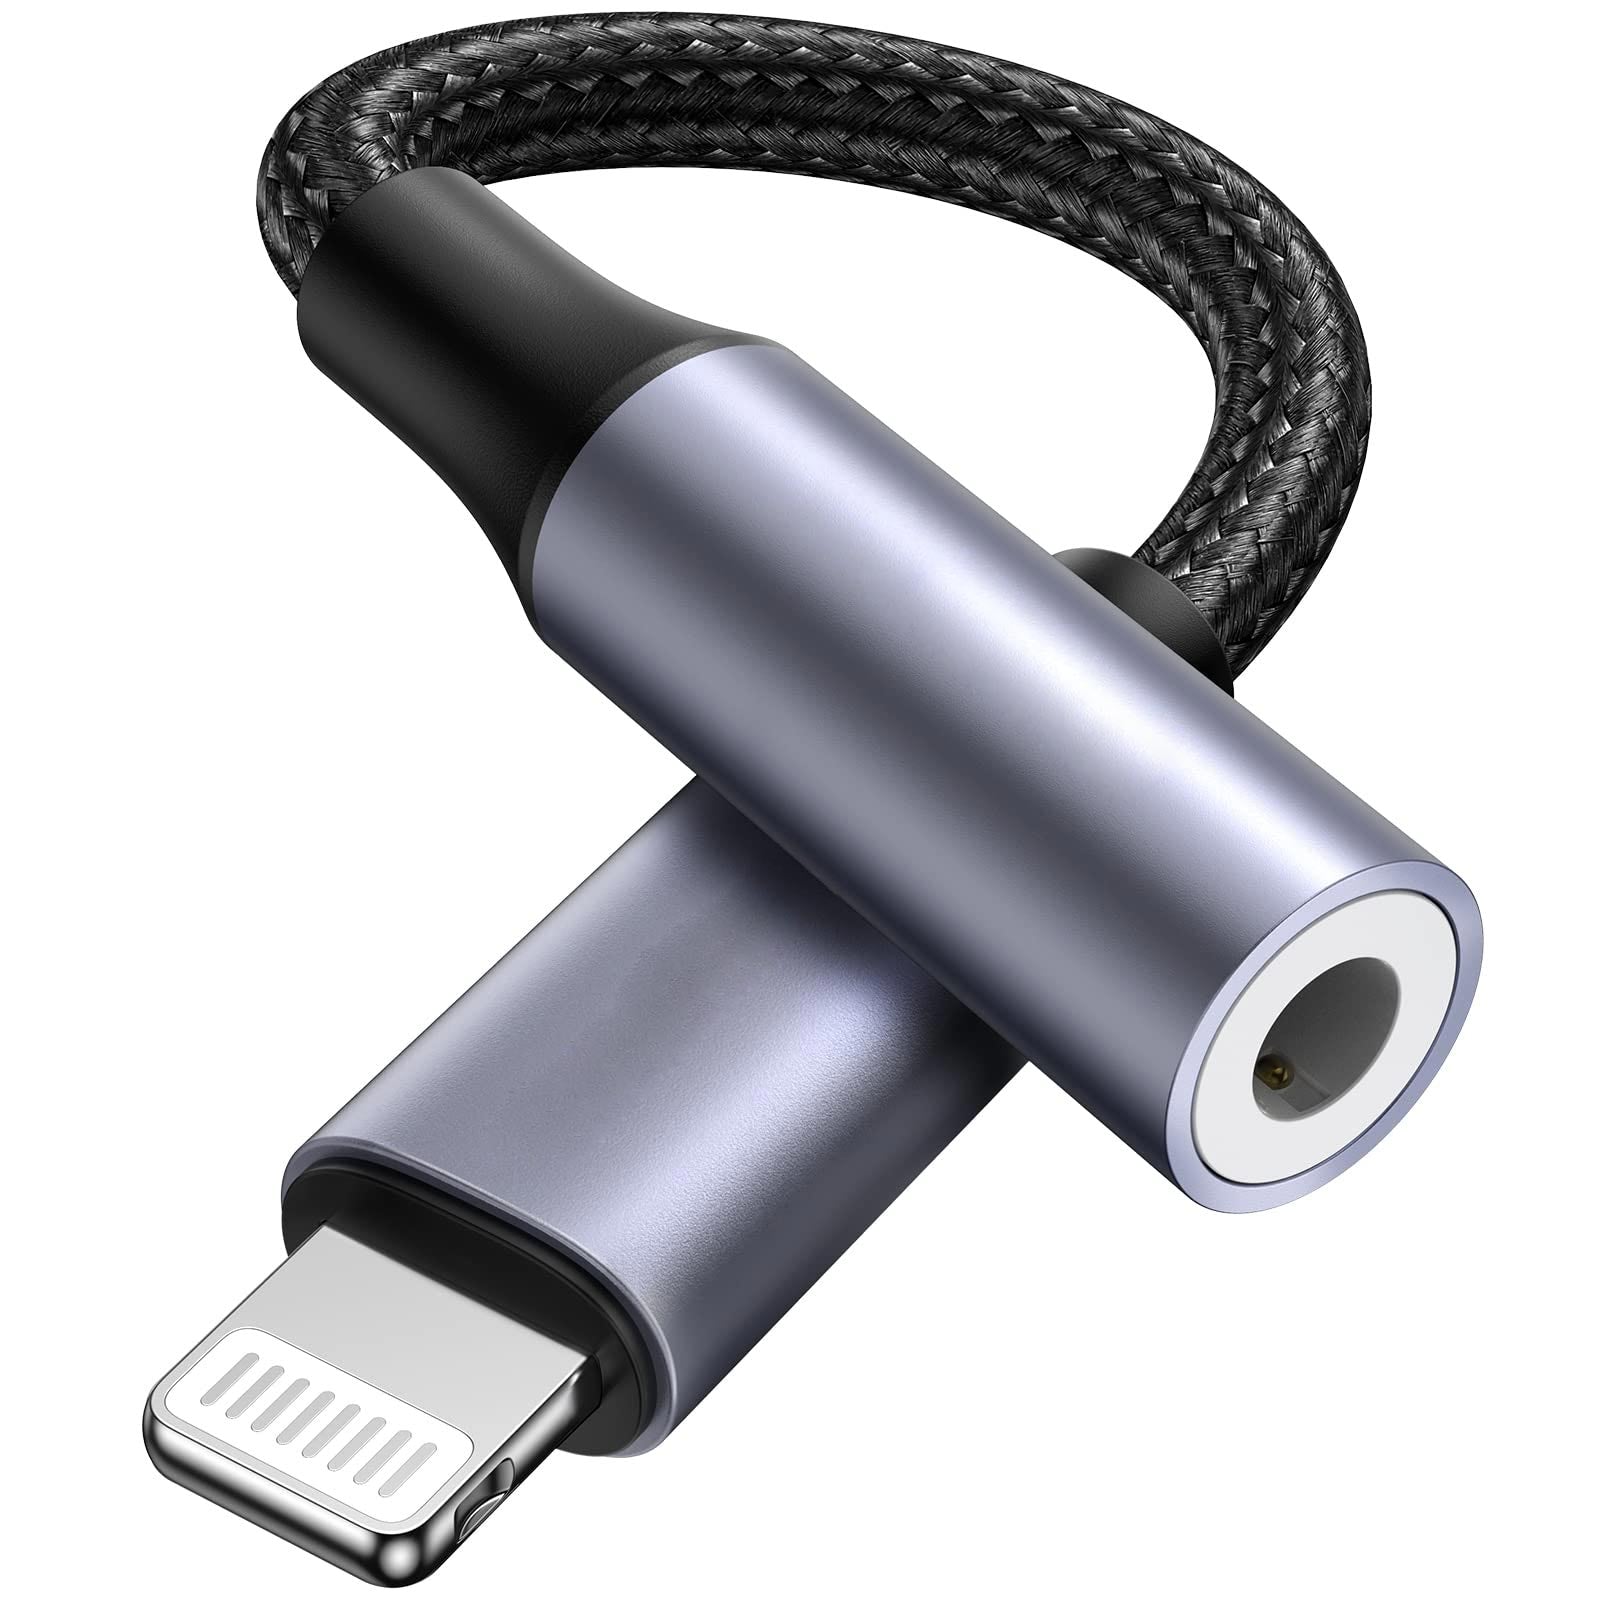 Lightning® Connector to 3.5mm Headphone Jack Adapter